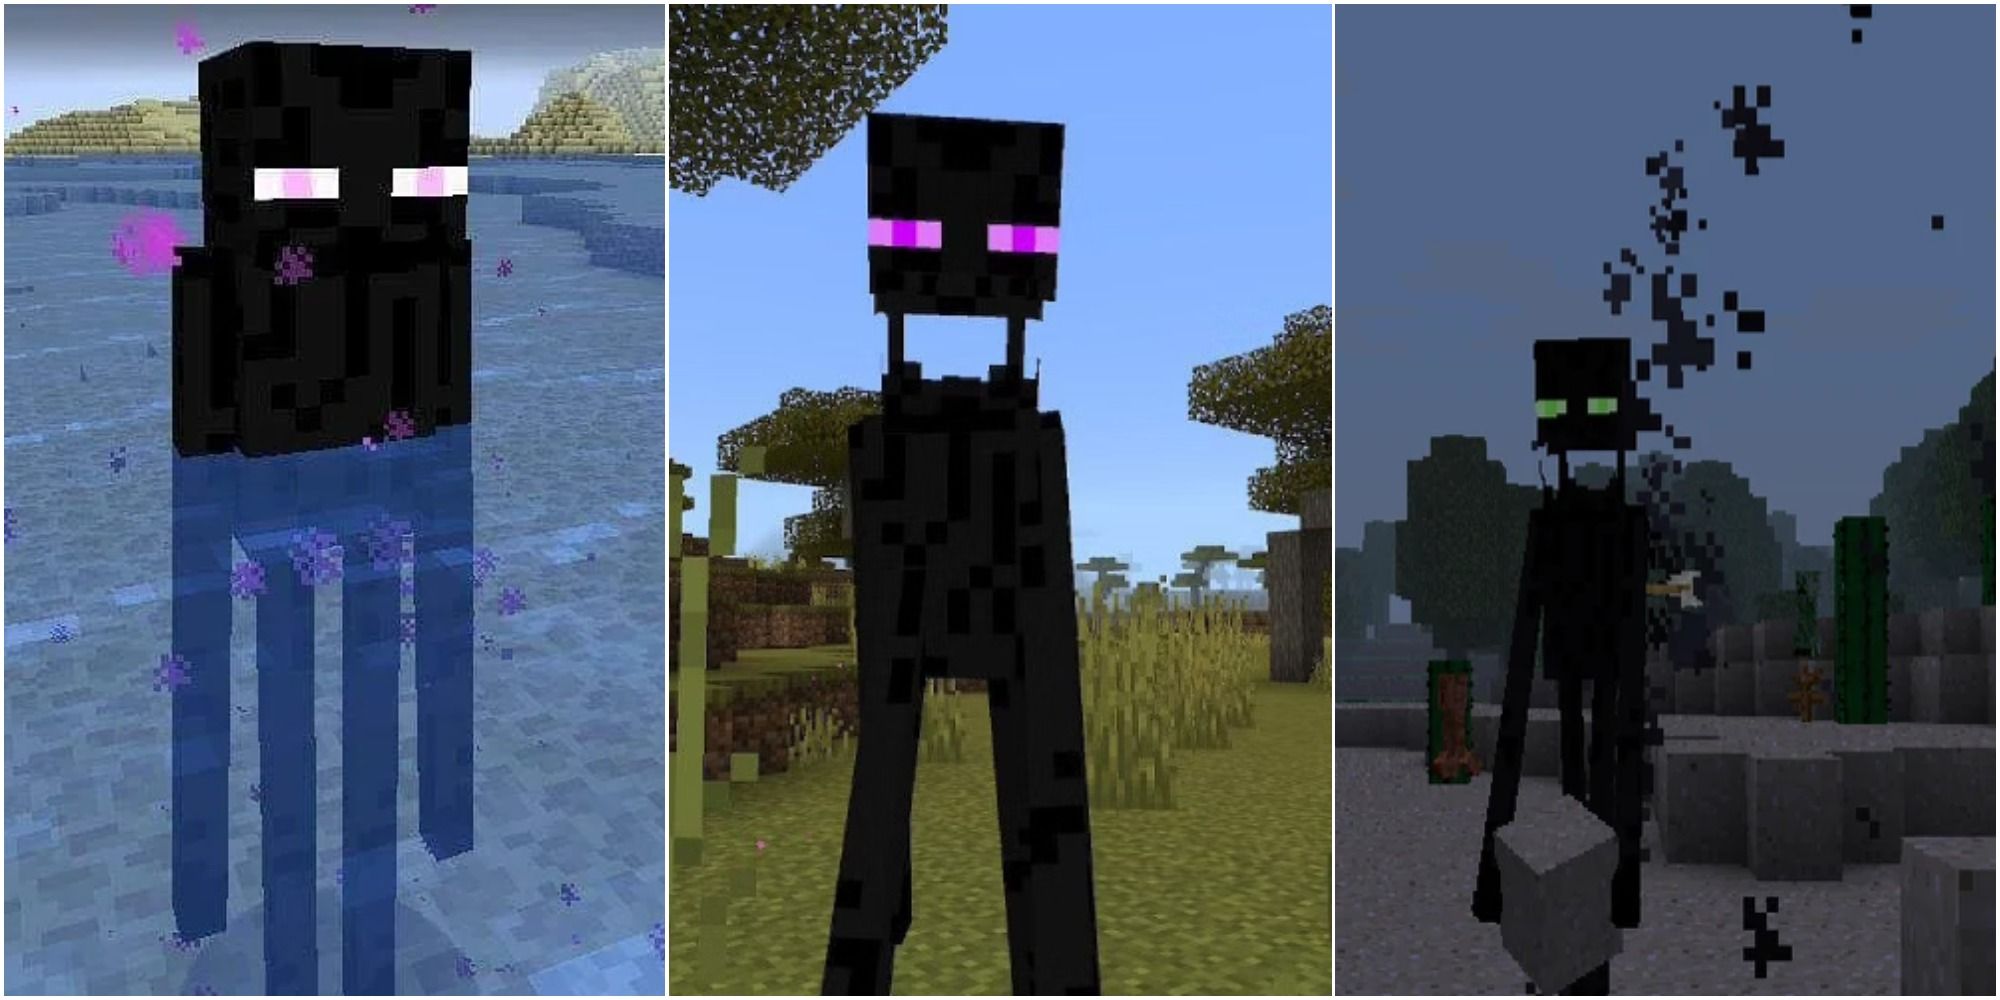 on the left is an Enderman in water, in the middle is an aggroed Enderman and on the right is an Enderman carrying a block